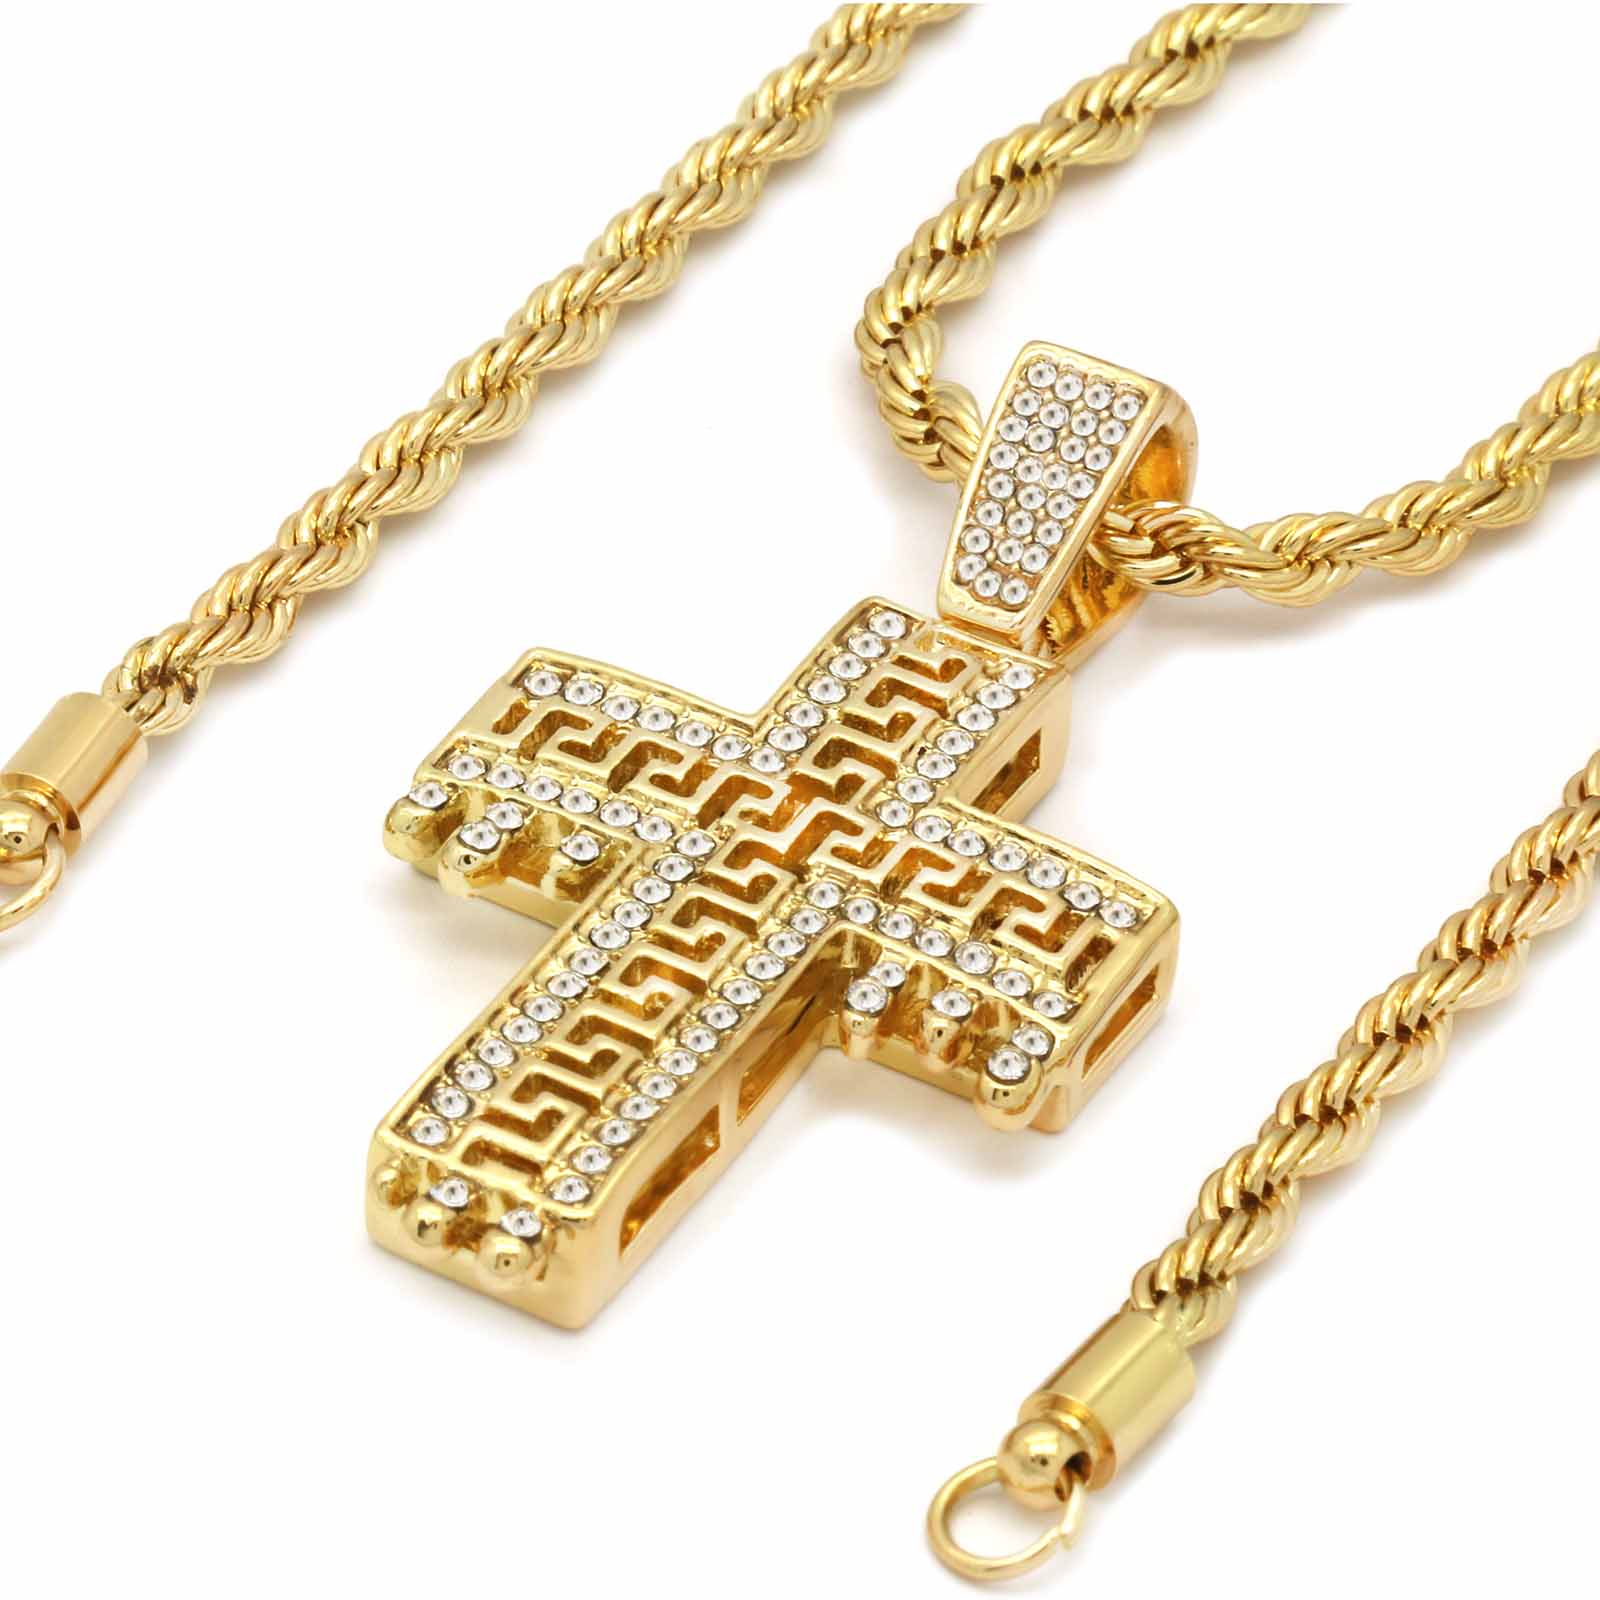 DRIP DESIGN CROSS PENDANT WITH GOLD ROPE CHAIN